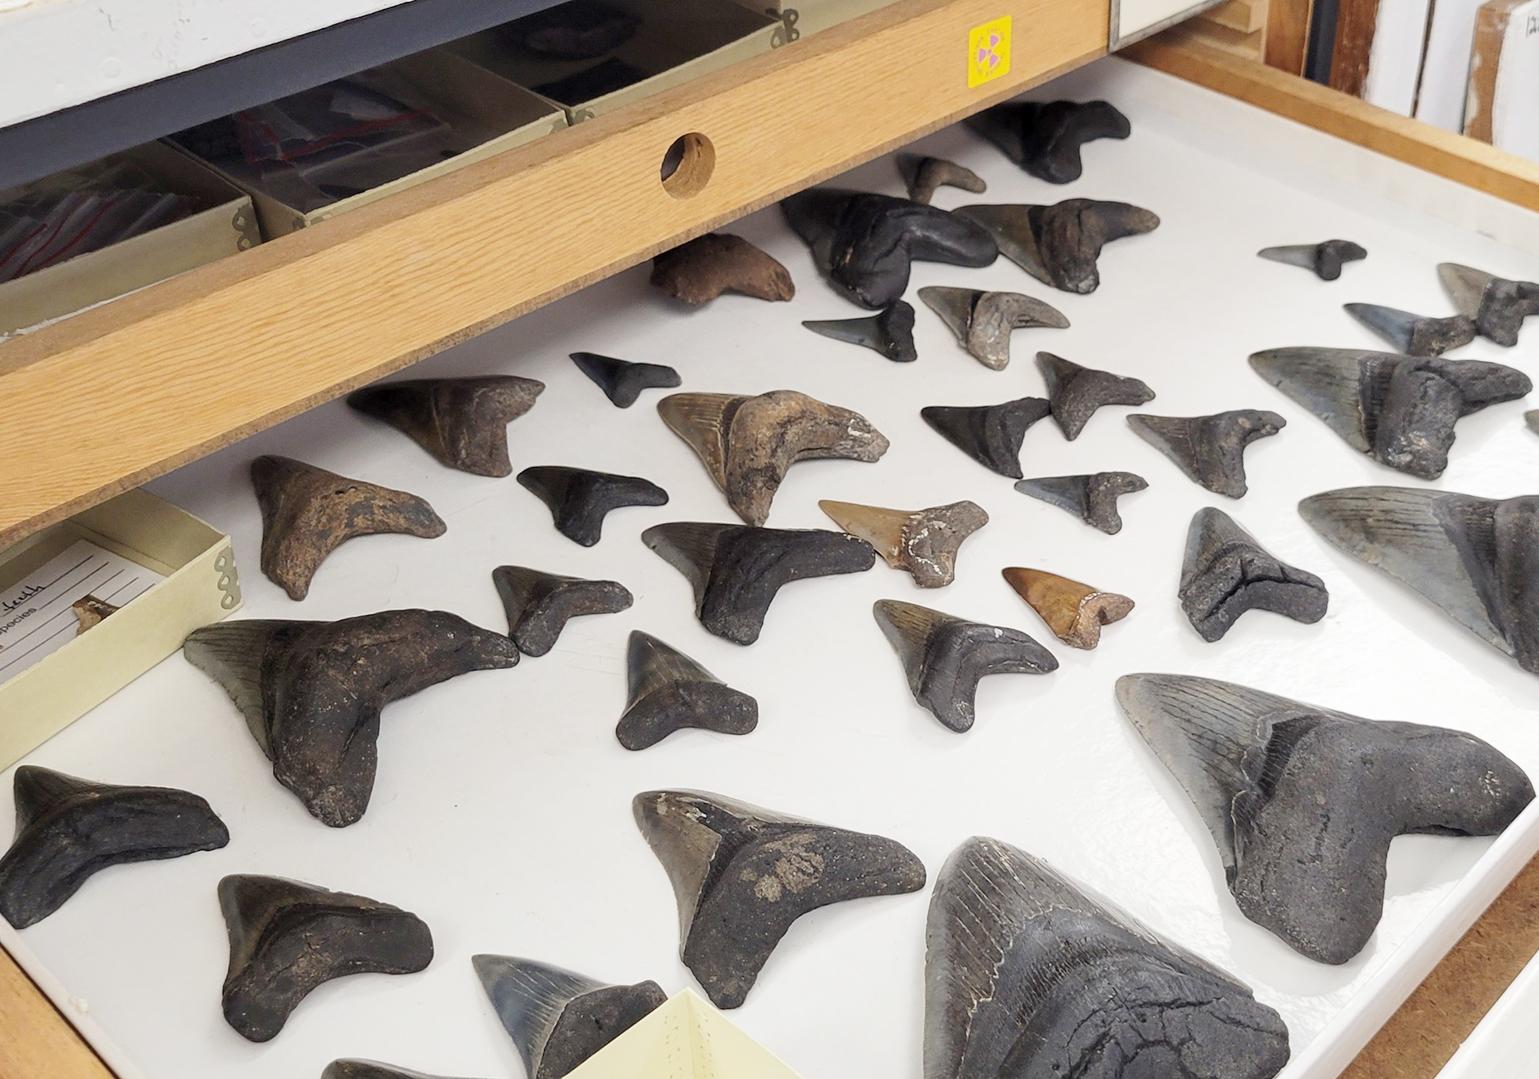 Pulled out drawer with rows of large, fossil shark teeth placed inside